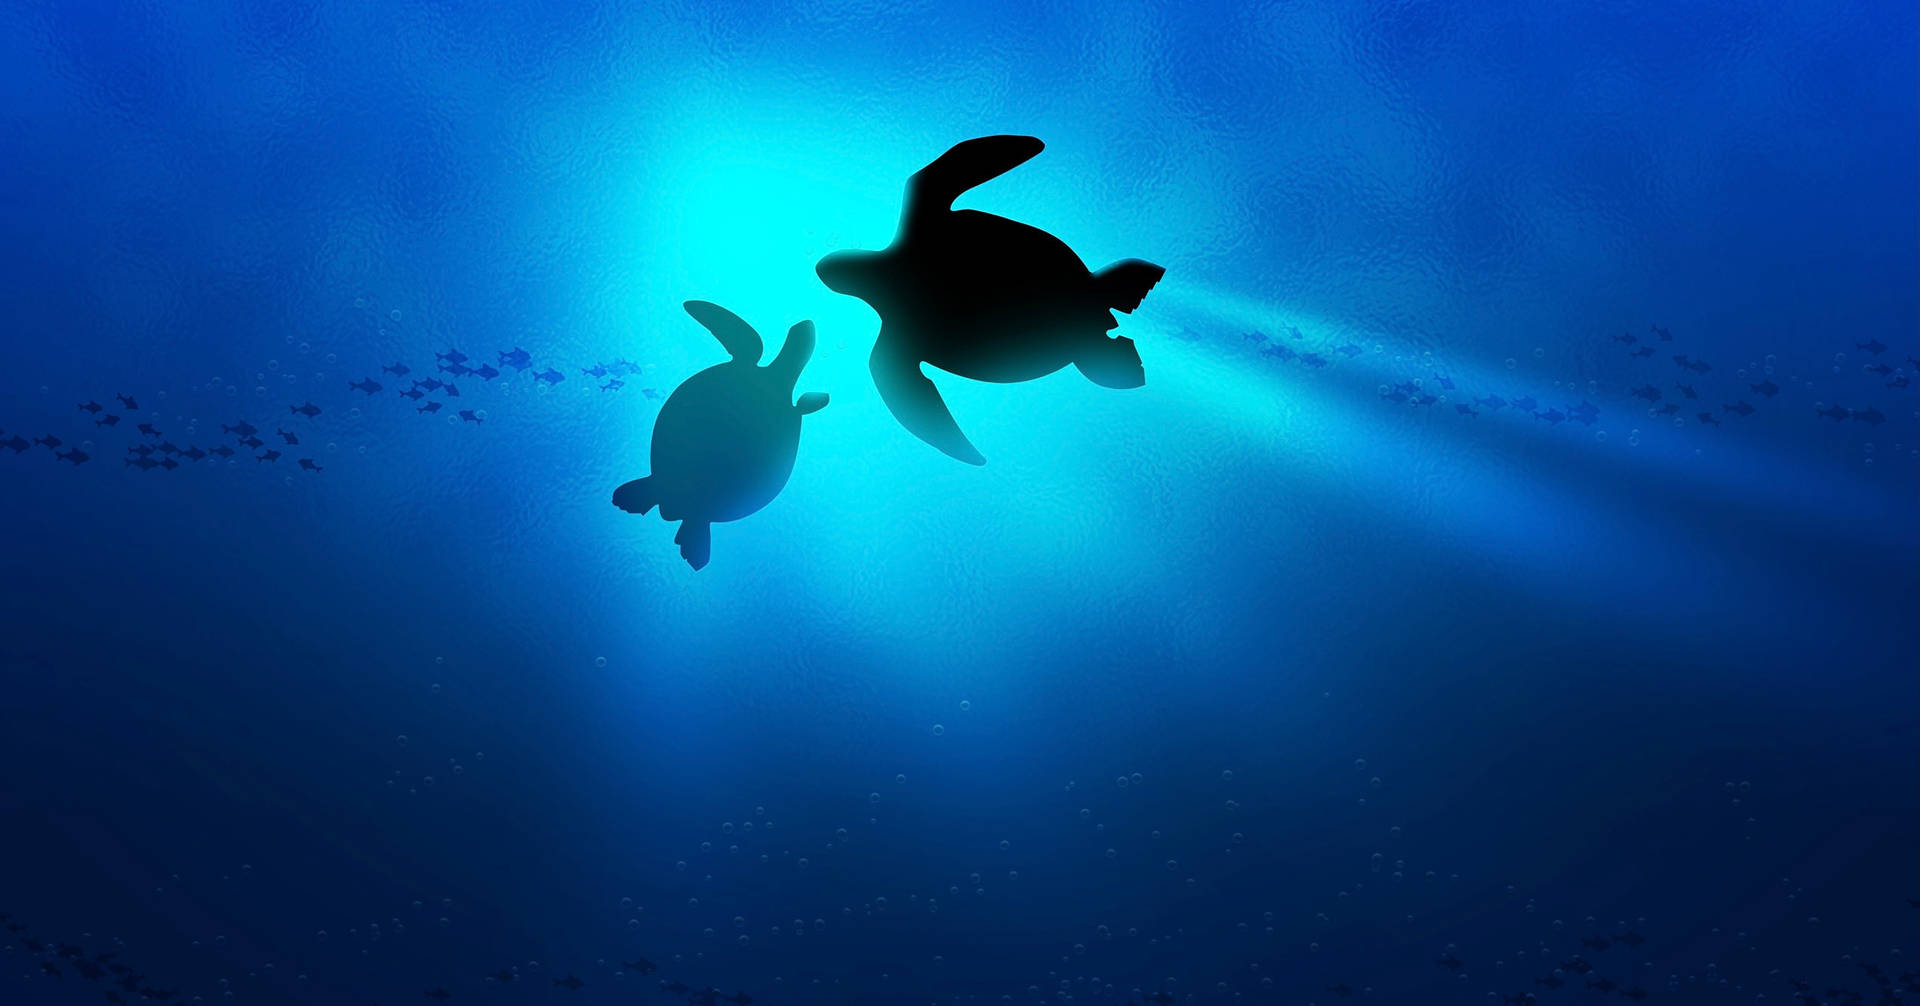 Two Turtles Silhouettes Wallpaper